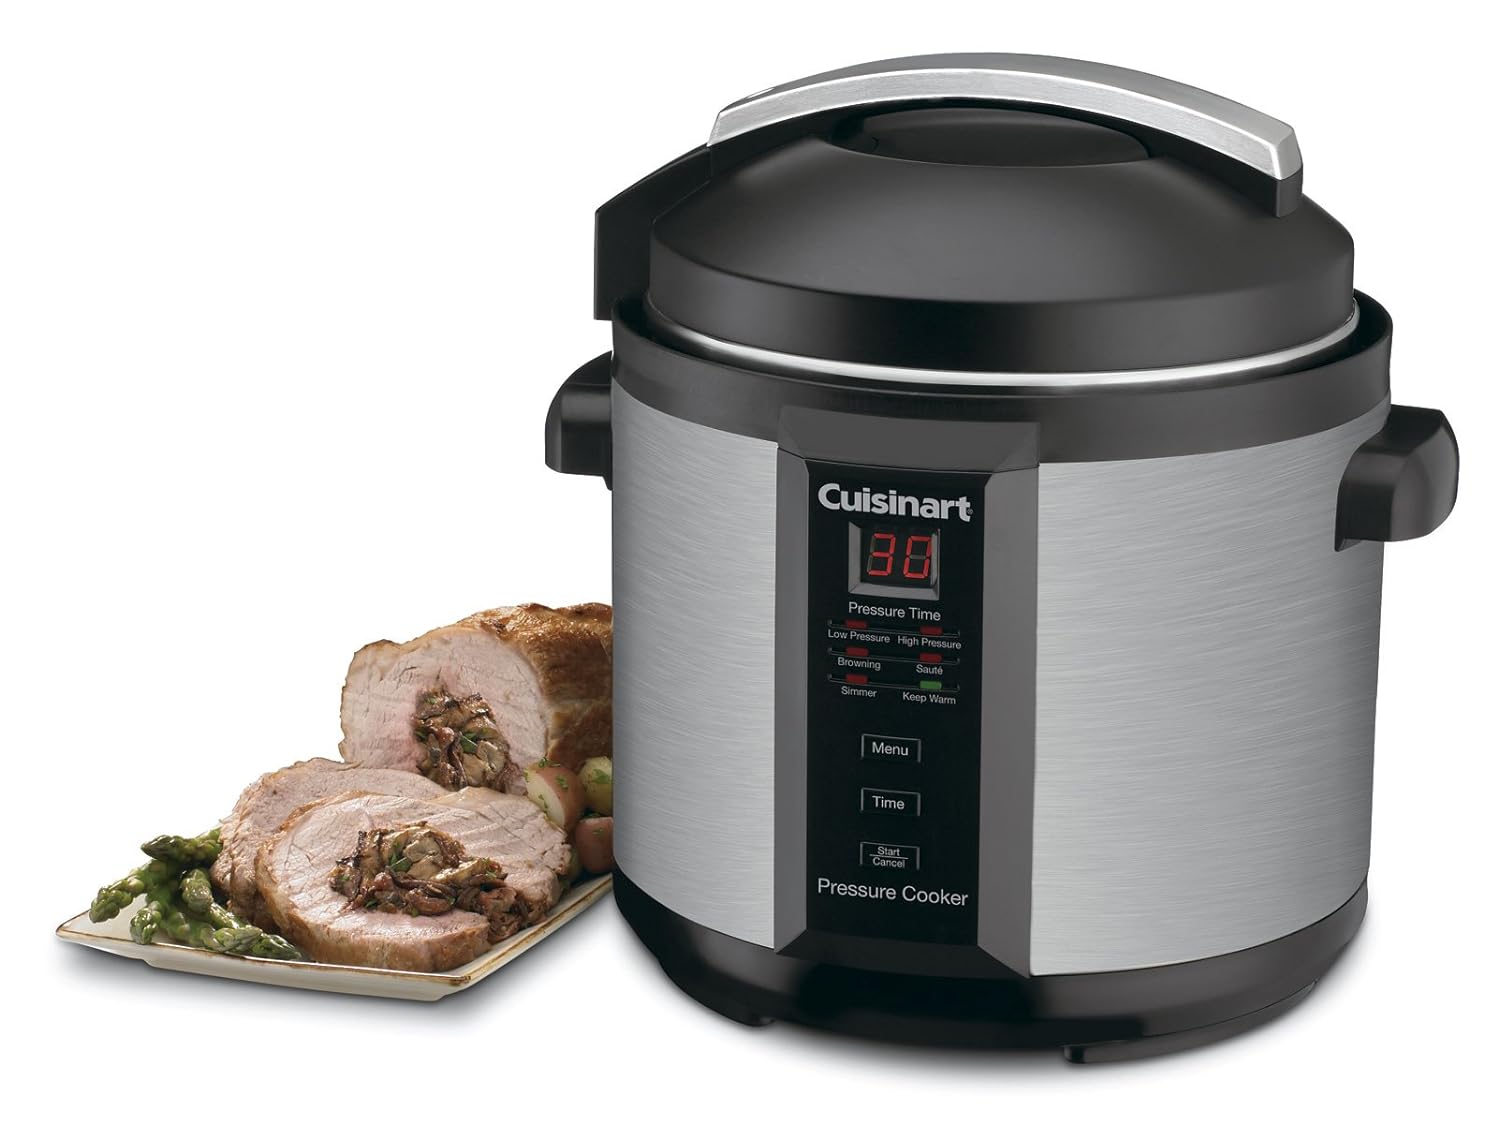 How To Use Cuisinart Electric Pressure Cooker